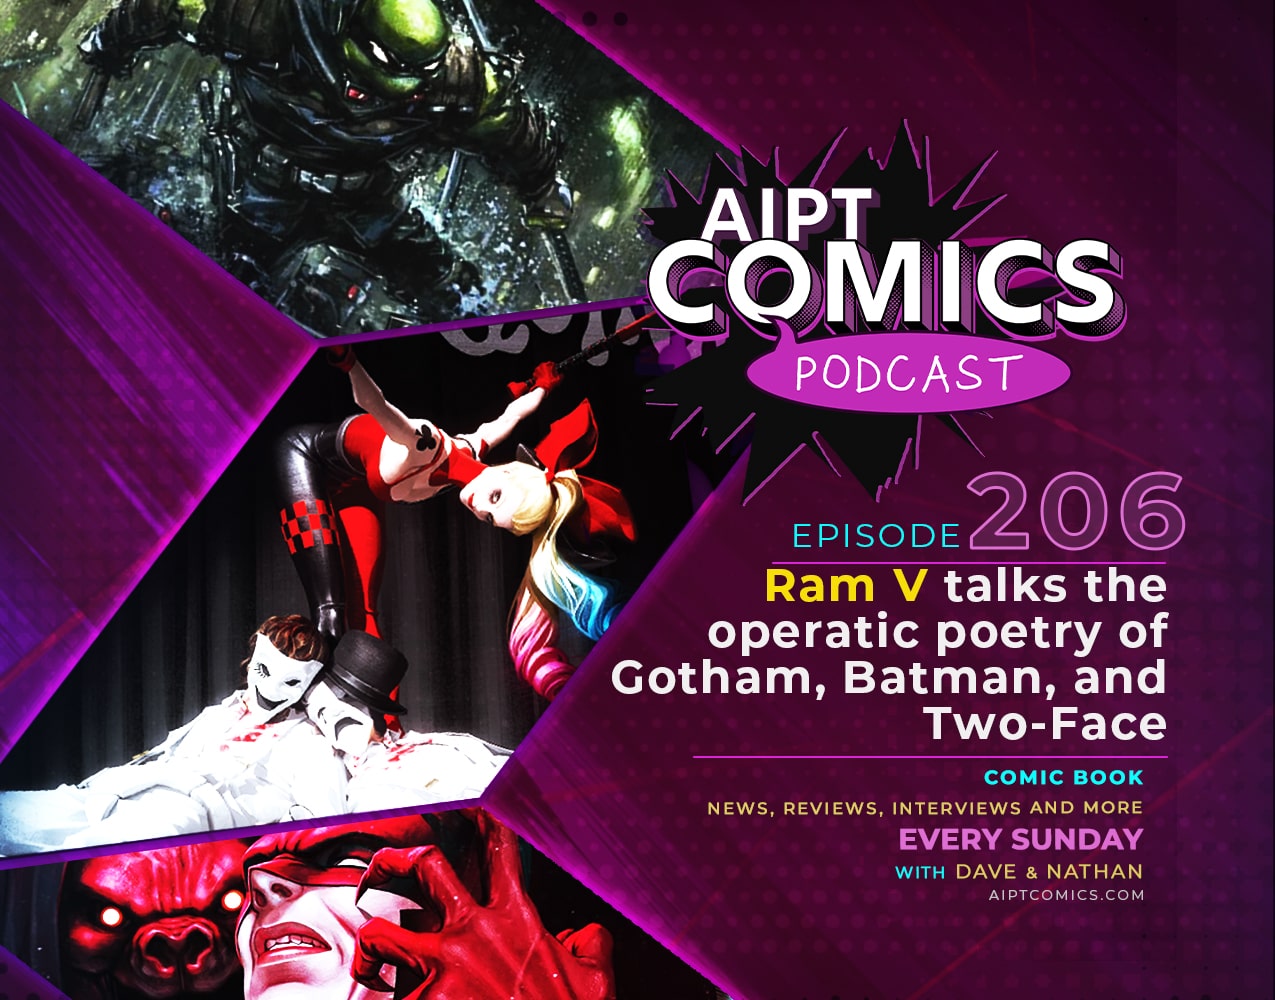 AIPT Comics Podcast episode 206: Ram V talks the operatic poetry of Gotham, Batman, and Two-Face